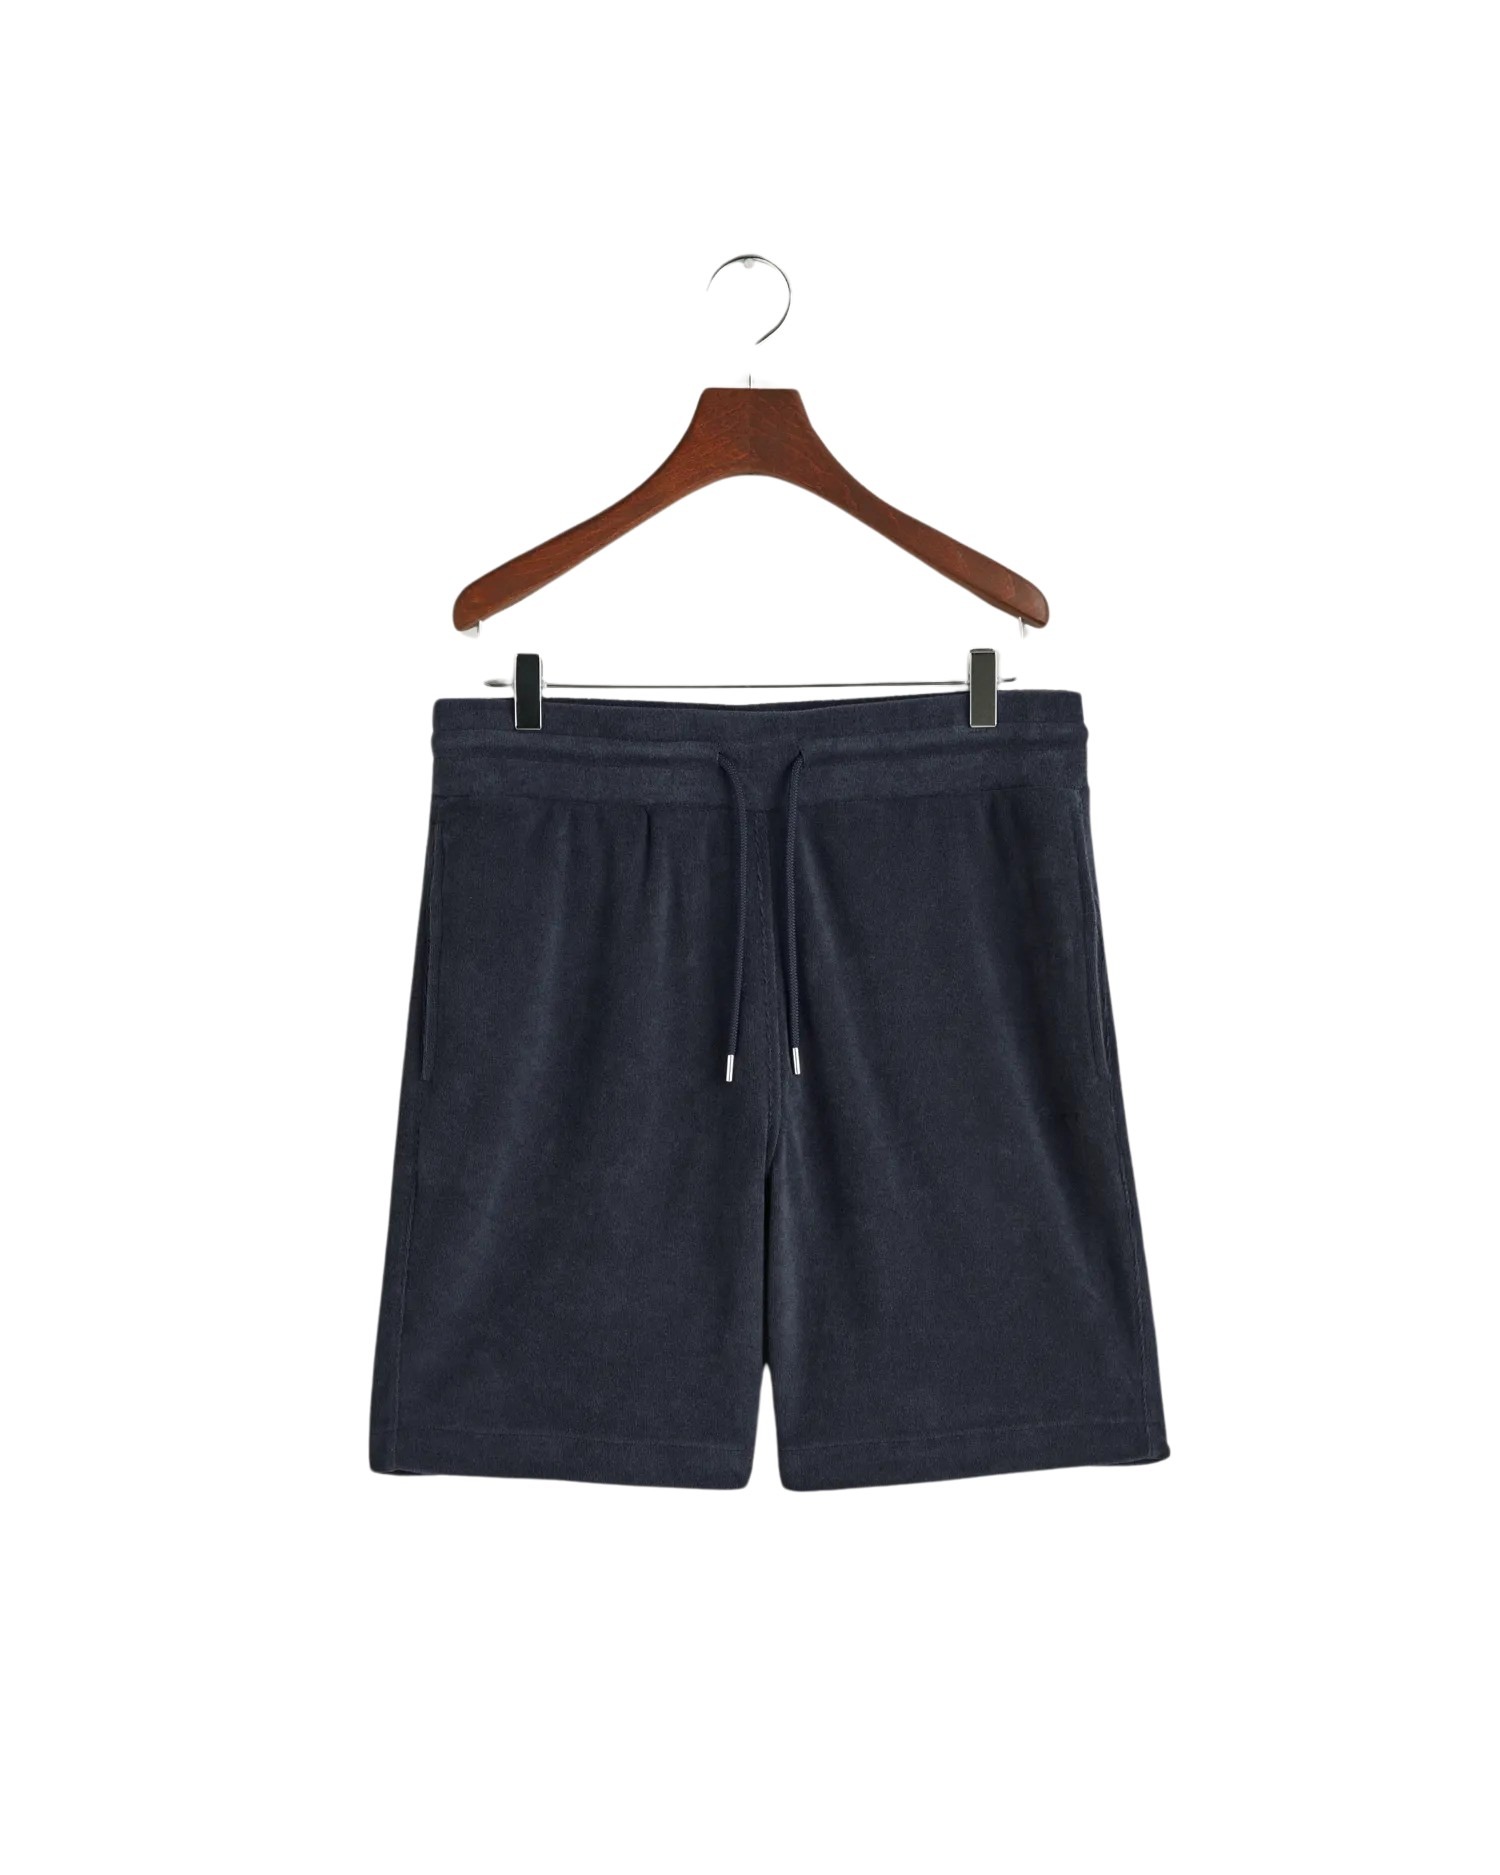 0048261_shorts-i-frotte